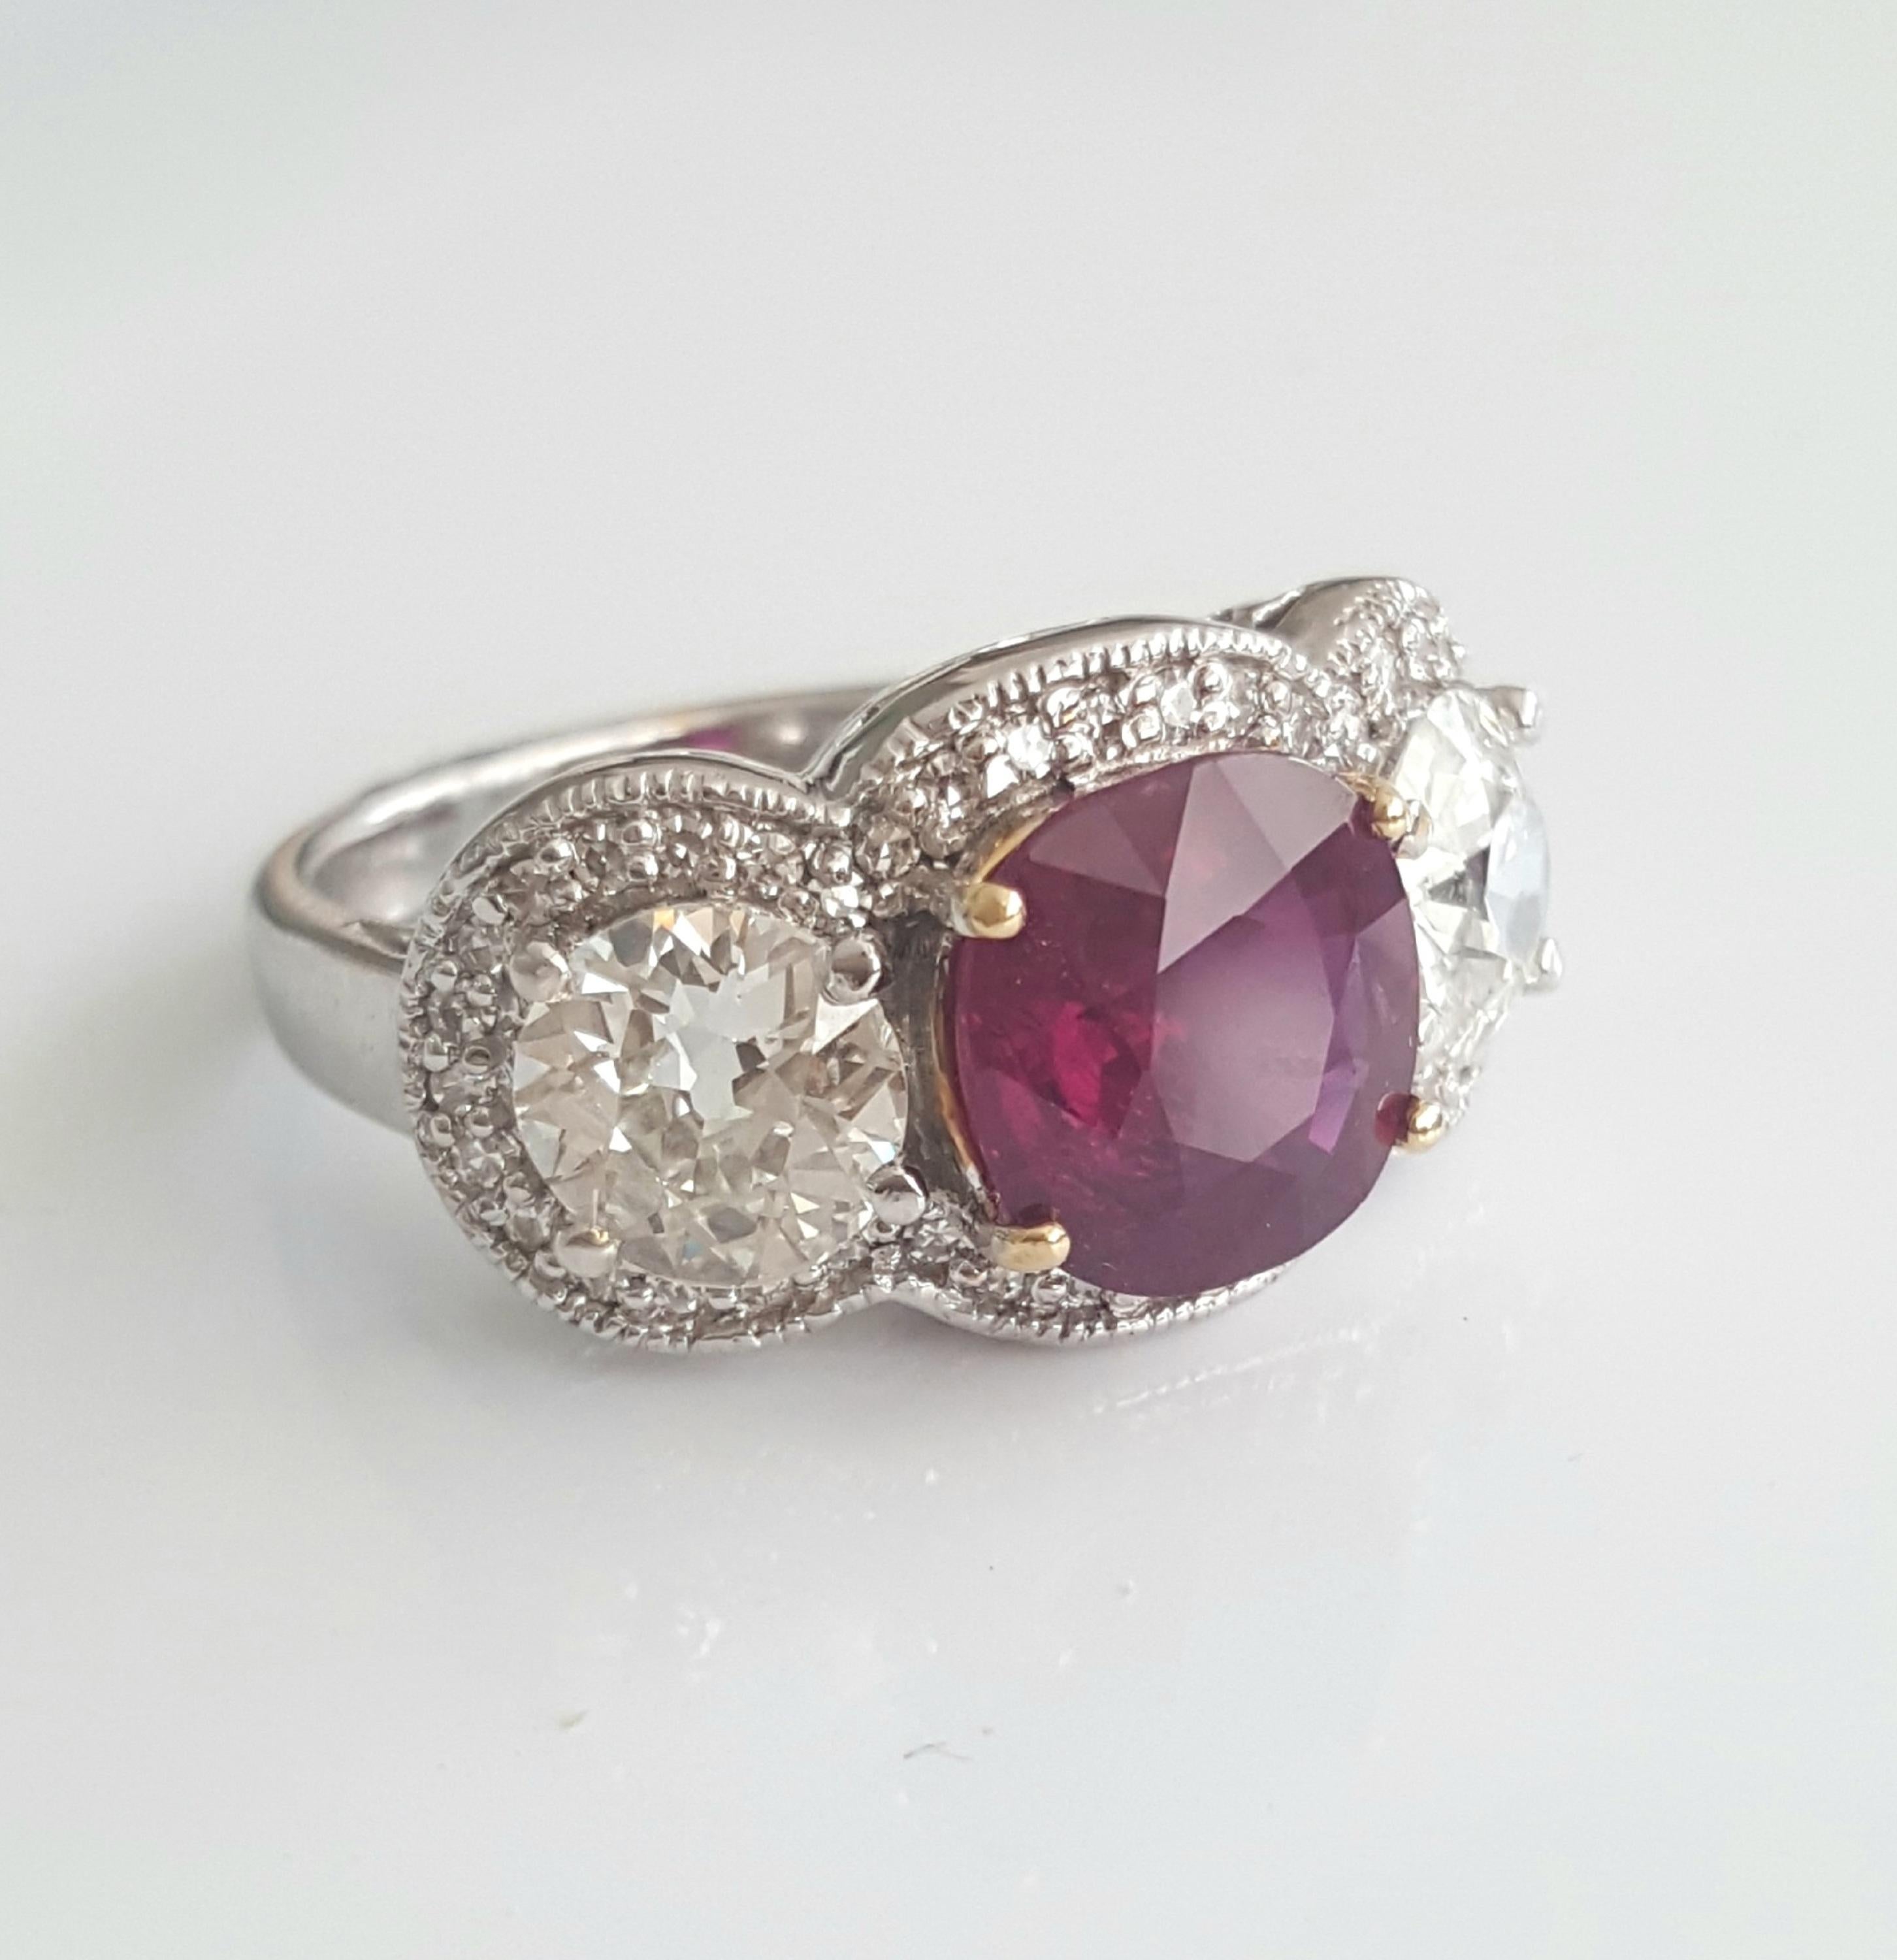 Contemporary 5.03 Carat Natural Cushion Ruby And White Round Old Cut Diamond Ring In 18K. For Sale